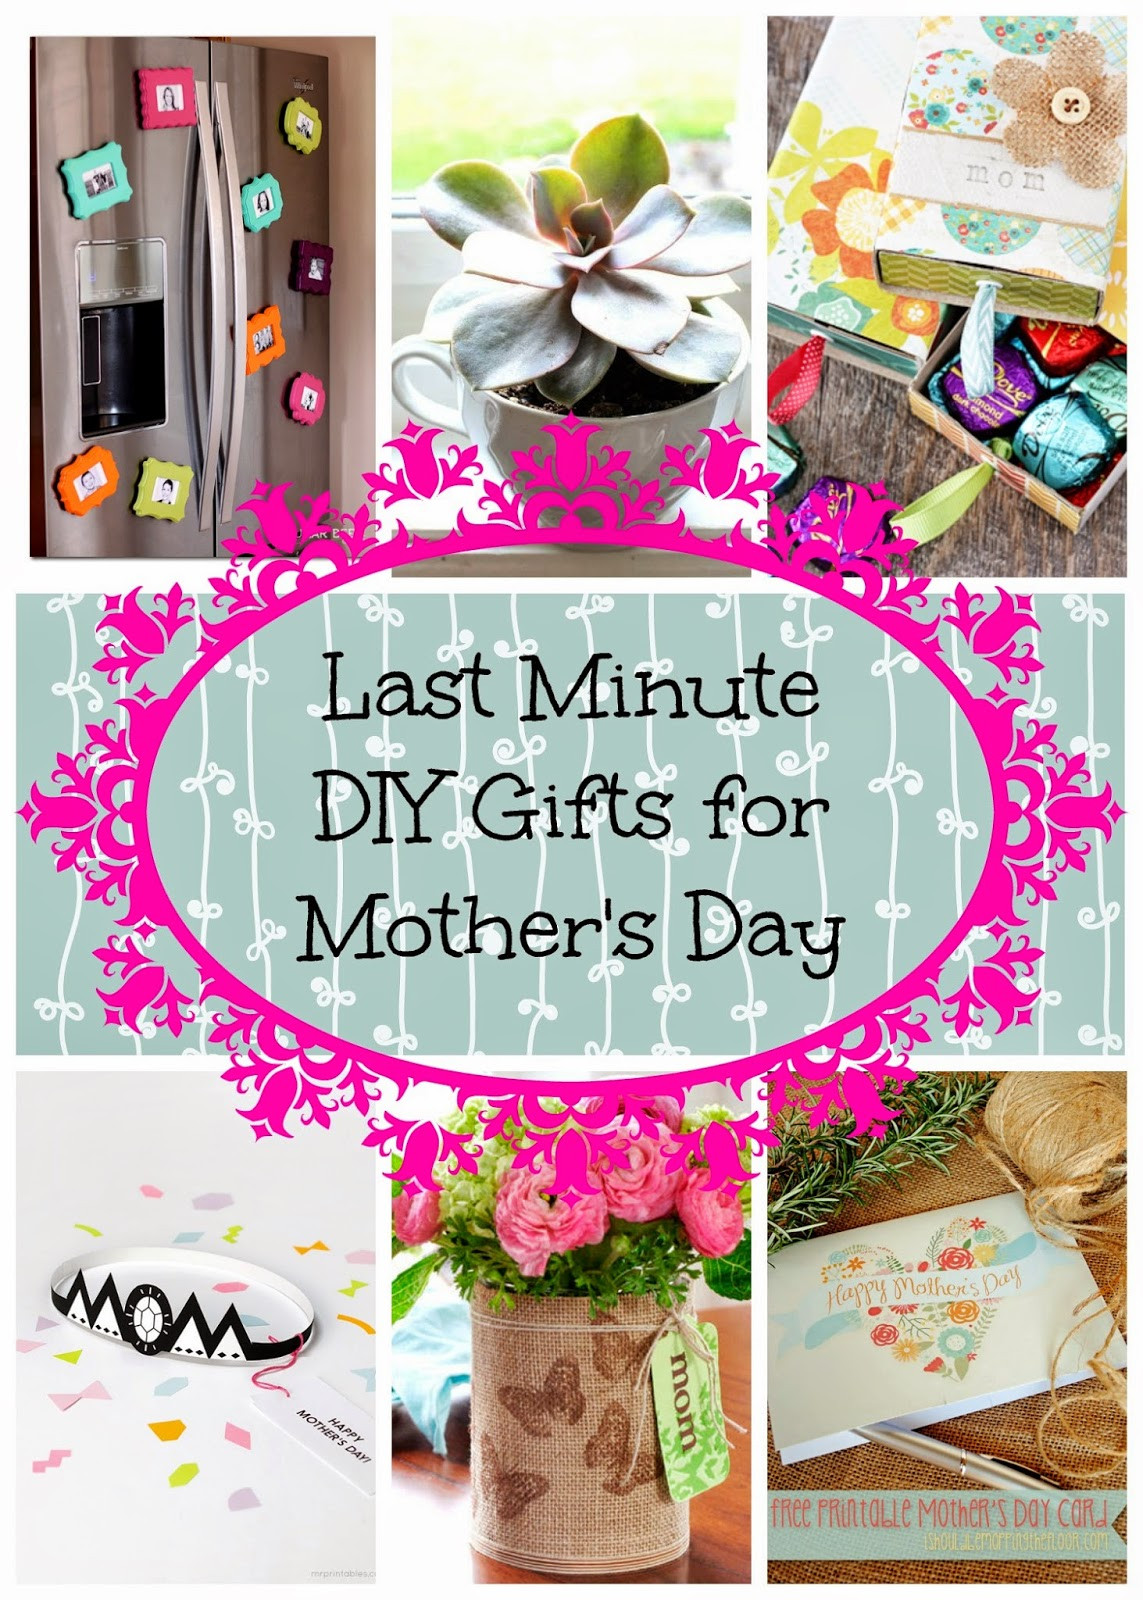 Last Minute Mother Day Gift Ideas
 Ambrosia s Creations DIY Last Minute Mother s Day Gift